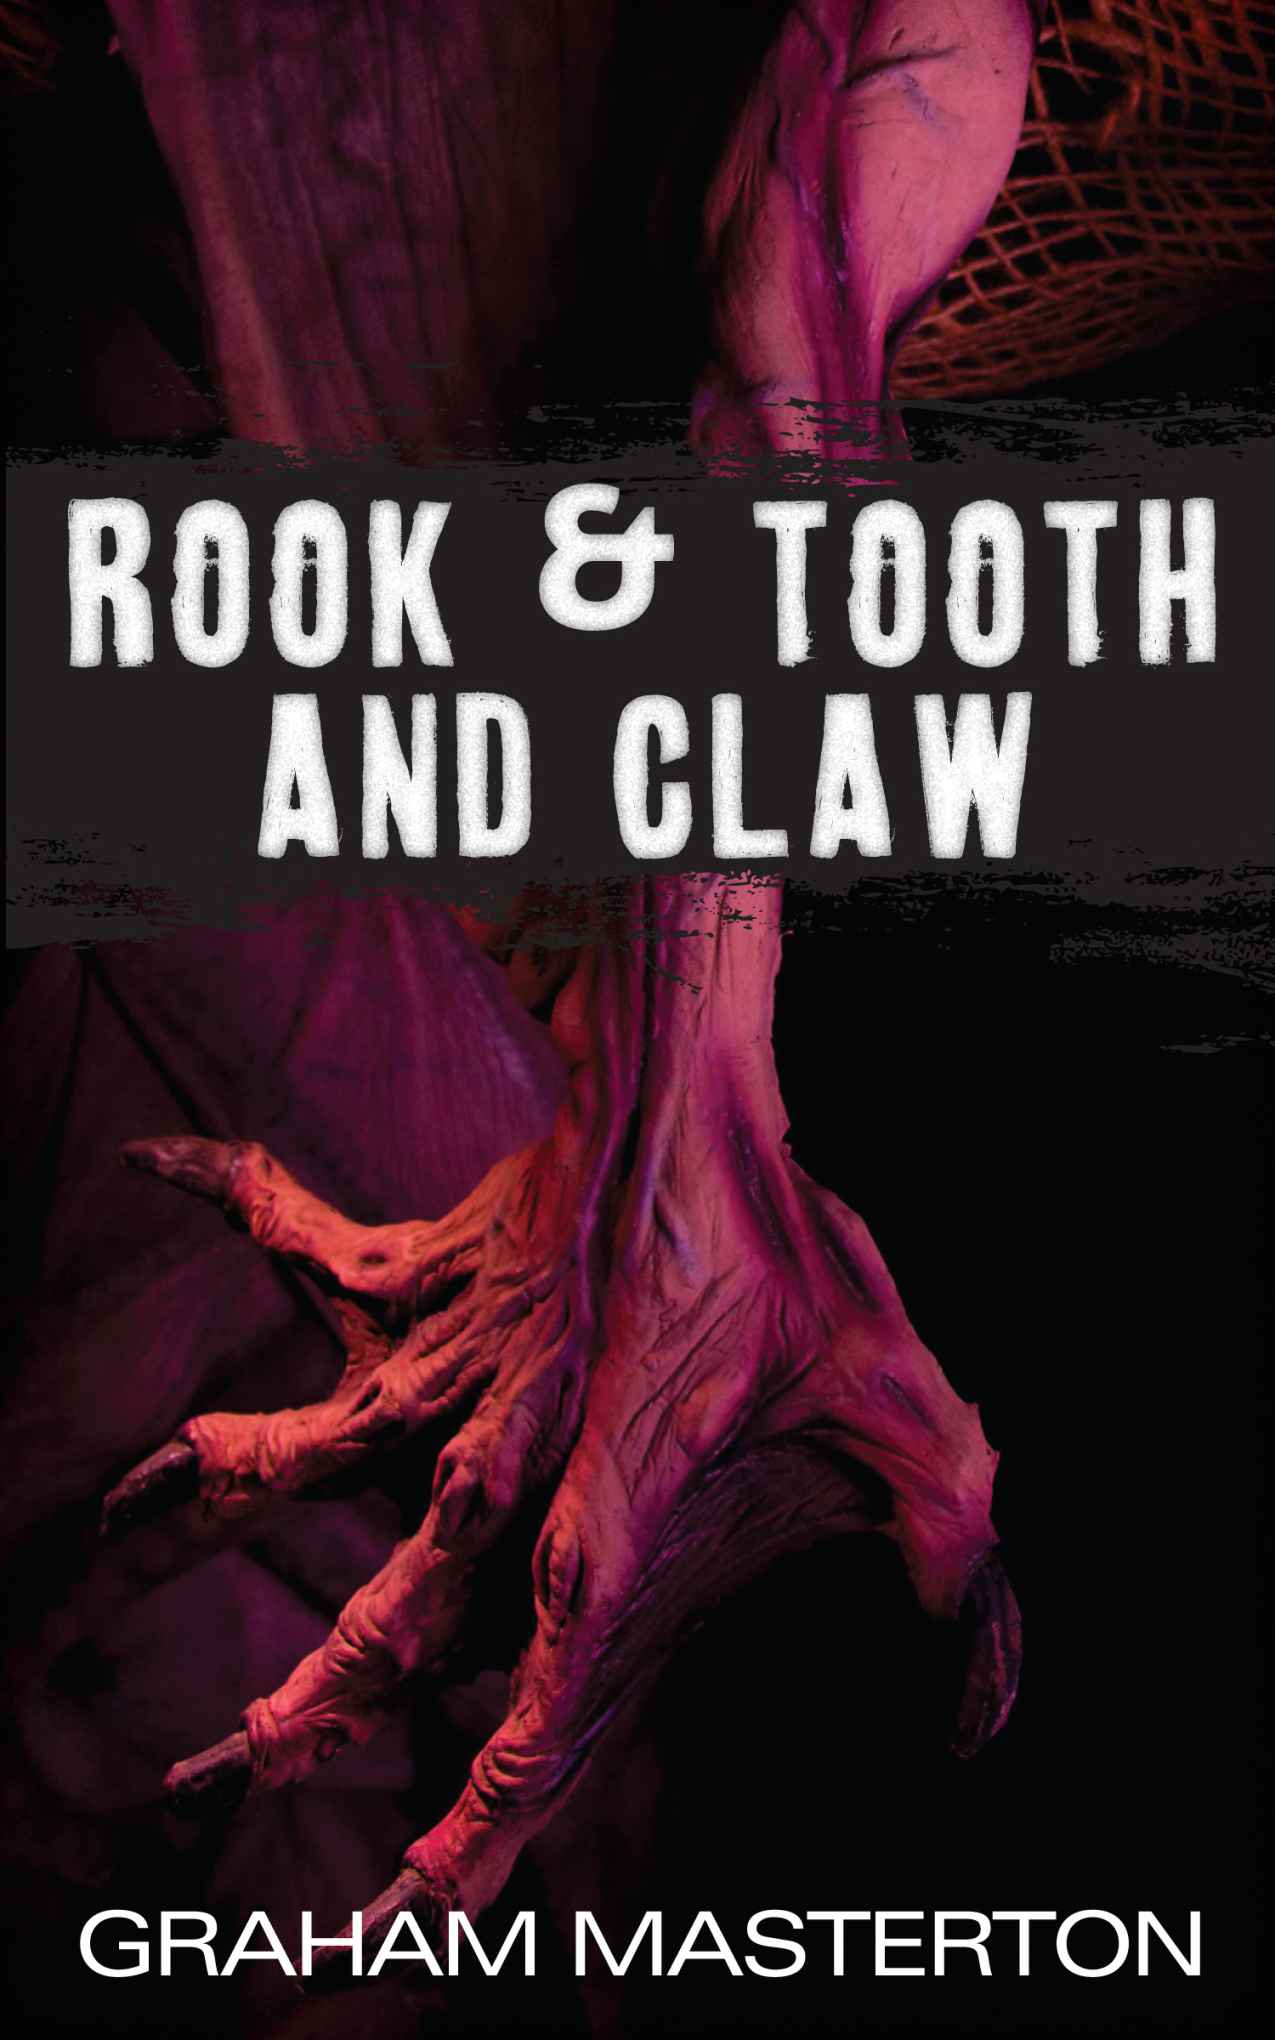 Rook & Tooth and Claw by Graham Masterton